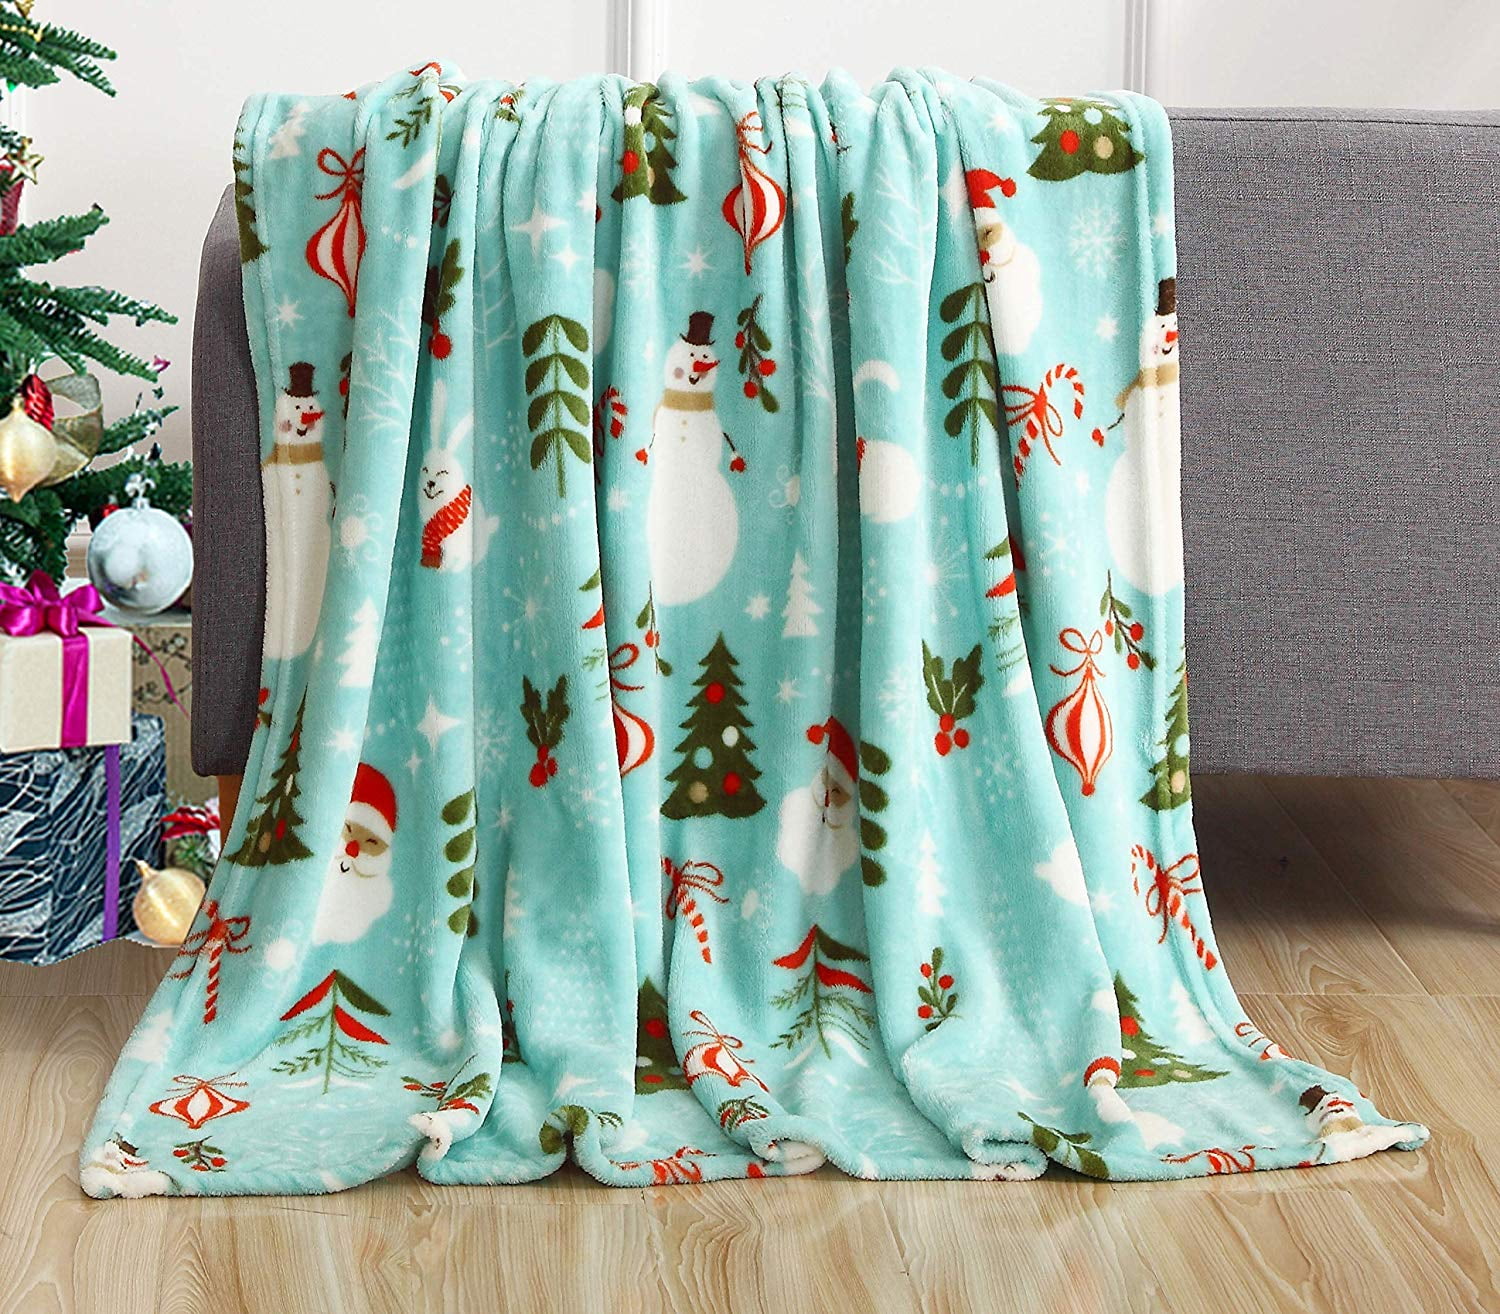 Merry Christmas Ultra-Soft Micro Fleece Blanket 60 X 50 Inches Warm Blanket for Womens Bed Couch Blanket Lightweight Blanket 